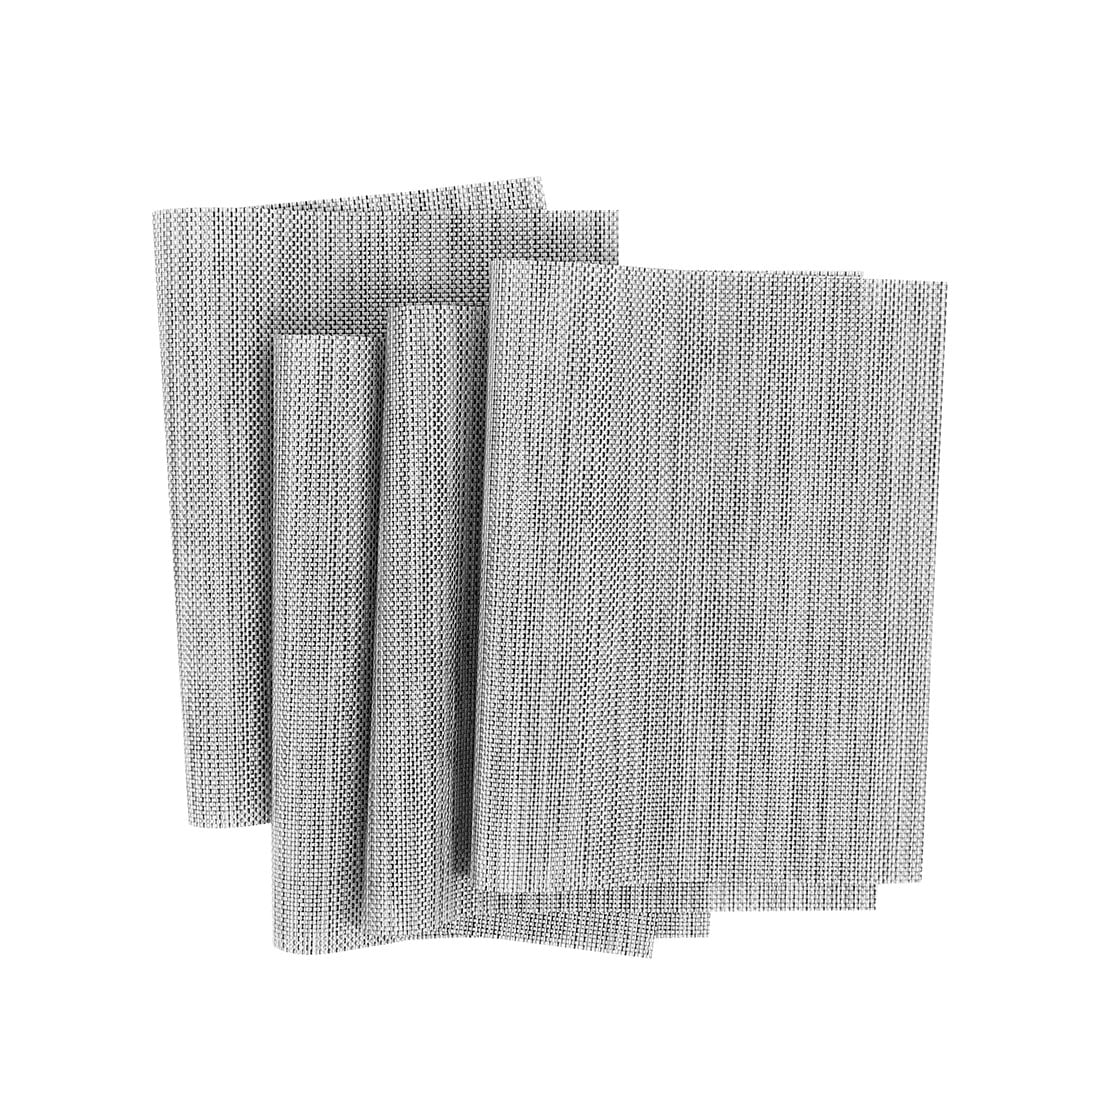 ABCCANOPY Placemats Heat-Resistant Place mats Non-Slip Insulation Placemat Washable Crossweave Woven Vinyl Table Mats for Kitchen and Dining Table 4 PCS, Diagonal Frame Silver Gray PM-4PCS-2